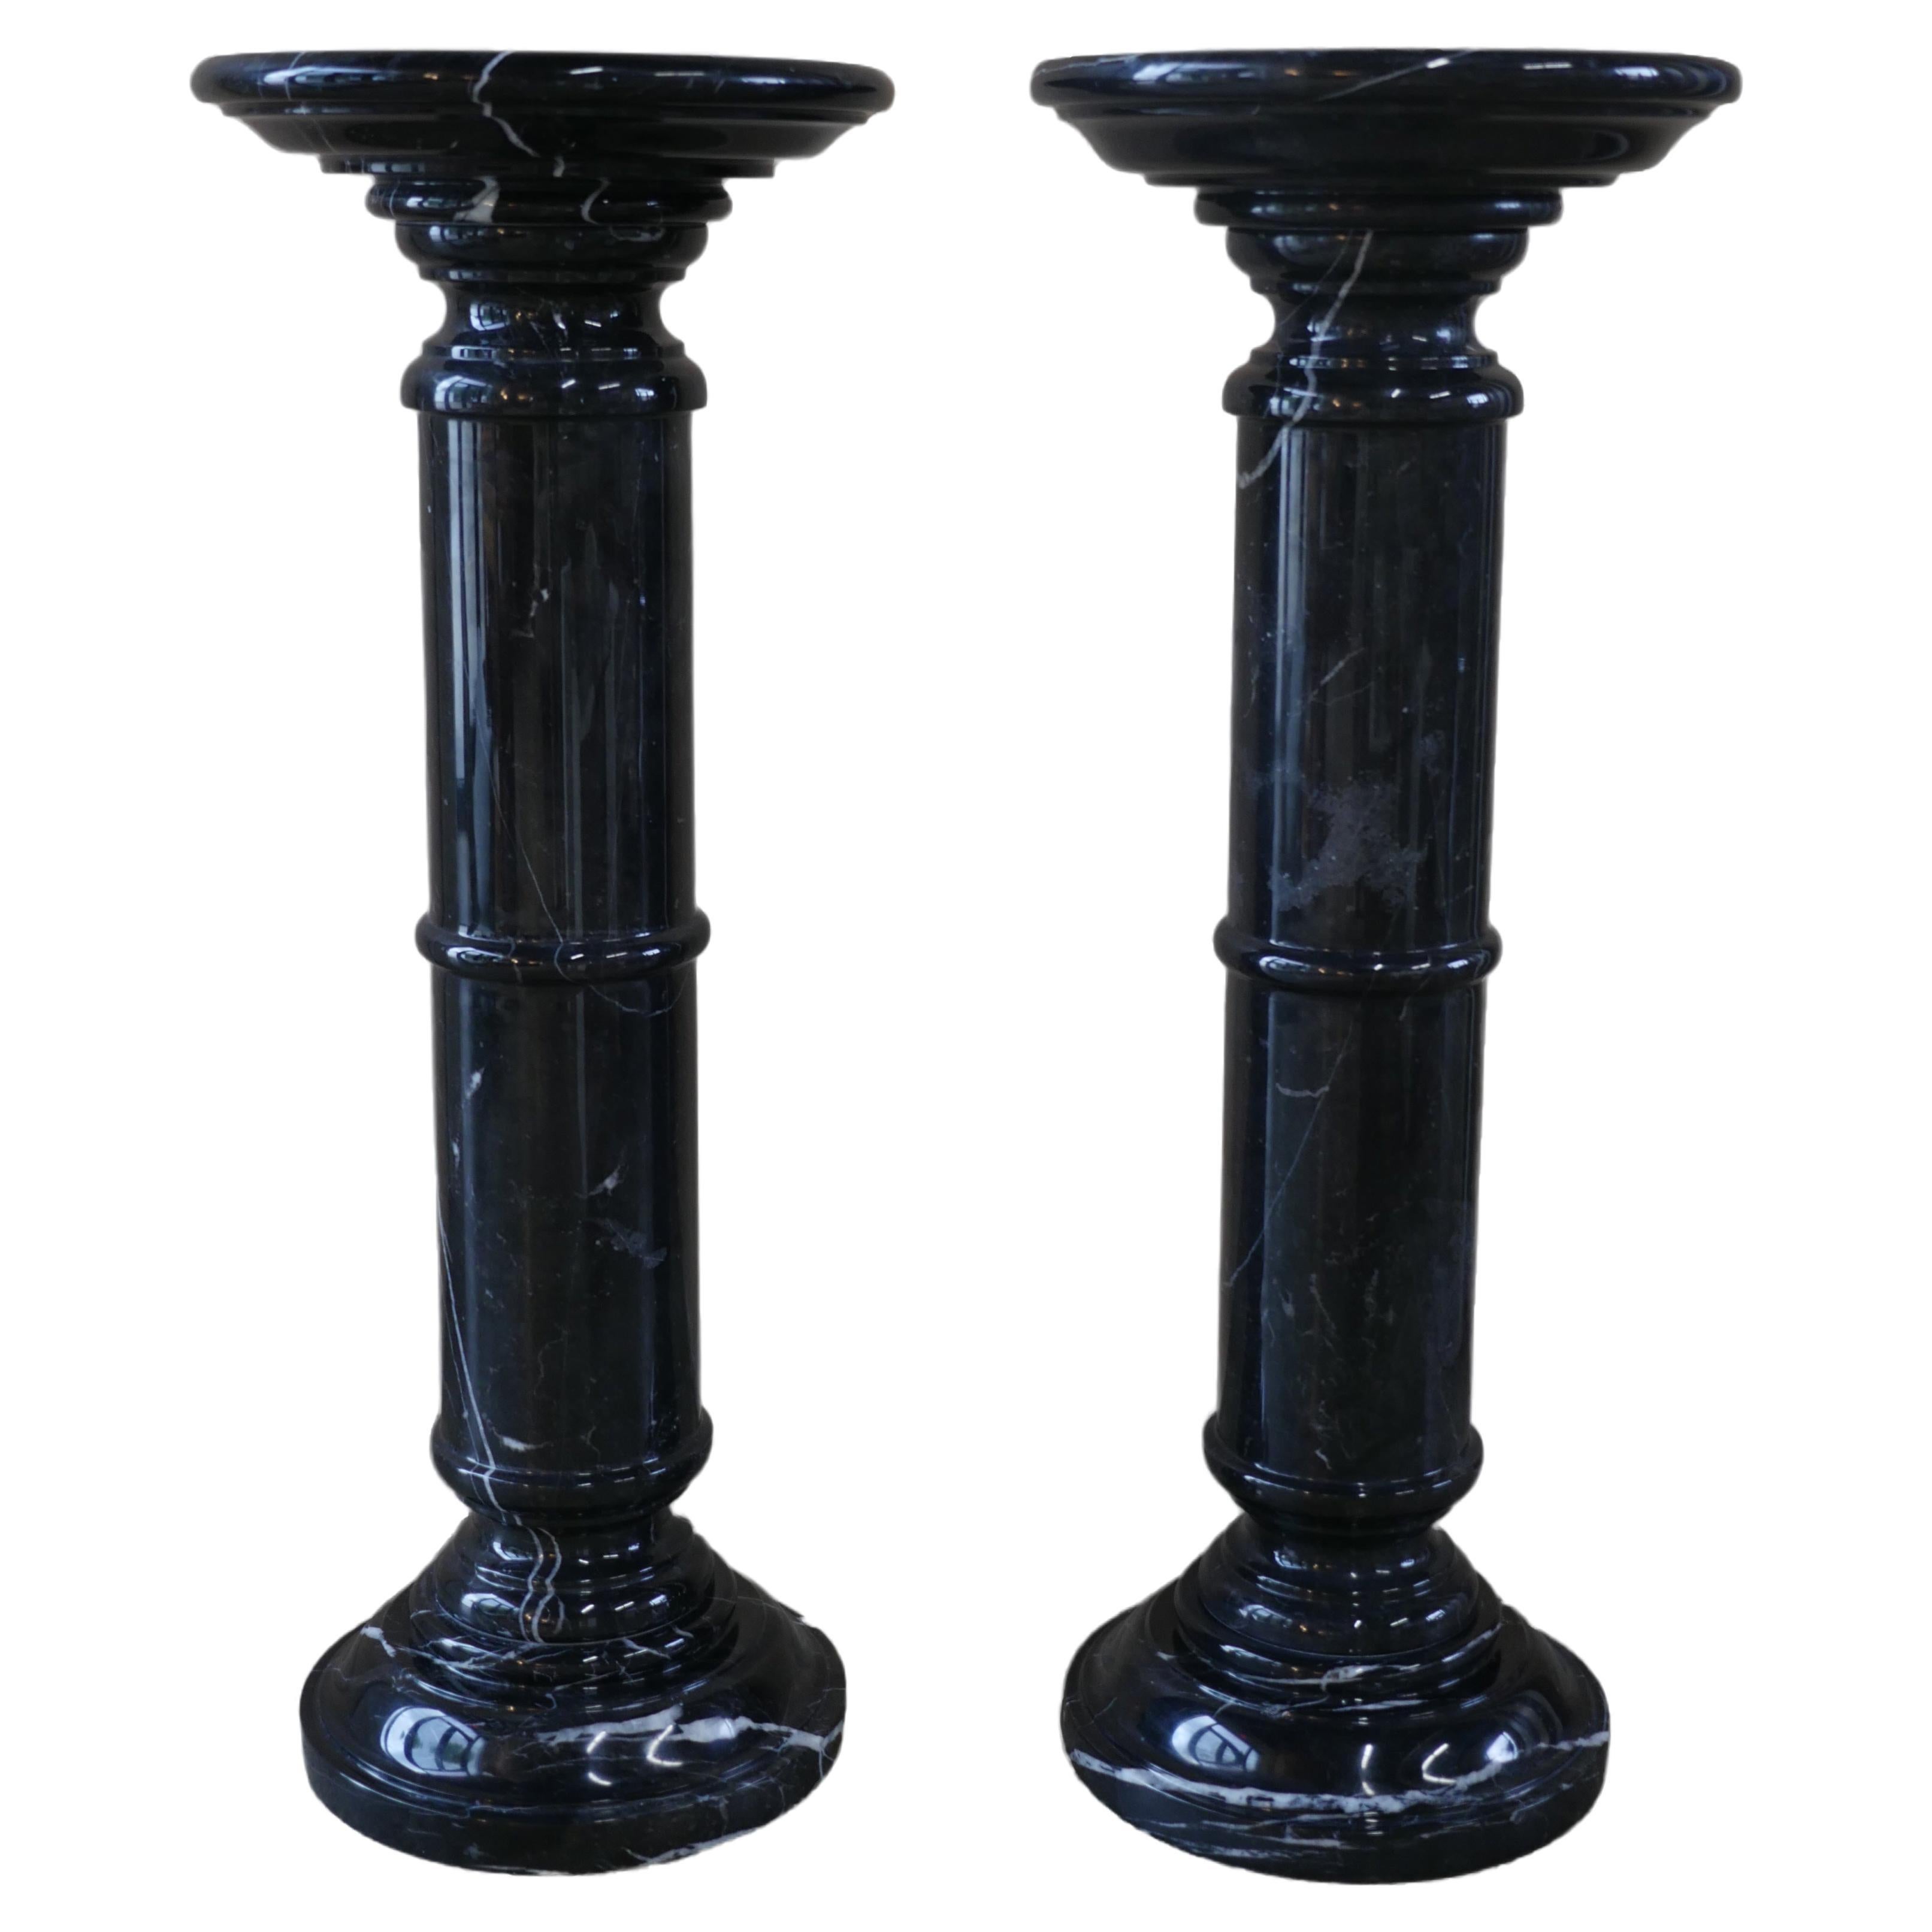 1970s Polished Nero Marquina Solid Marble Pedestals - Set of 2